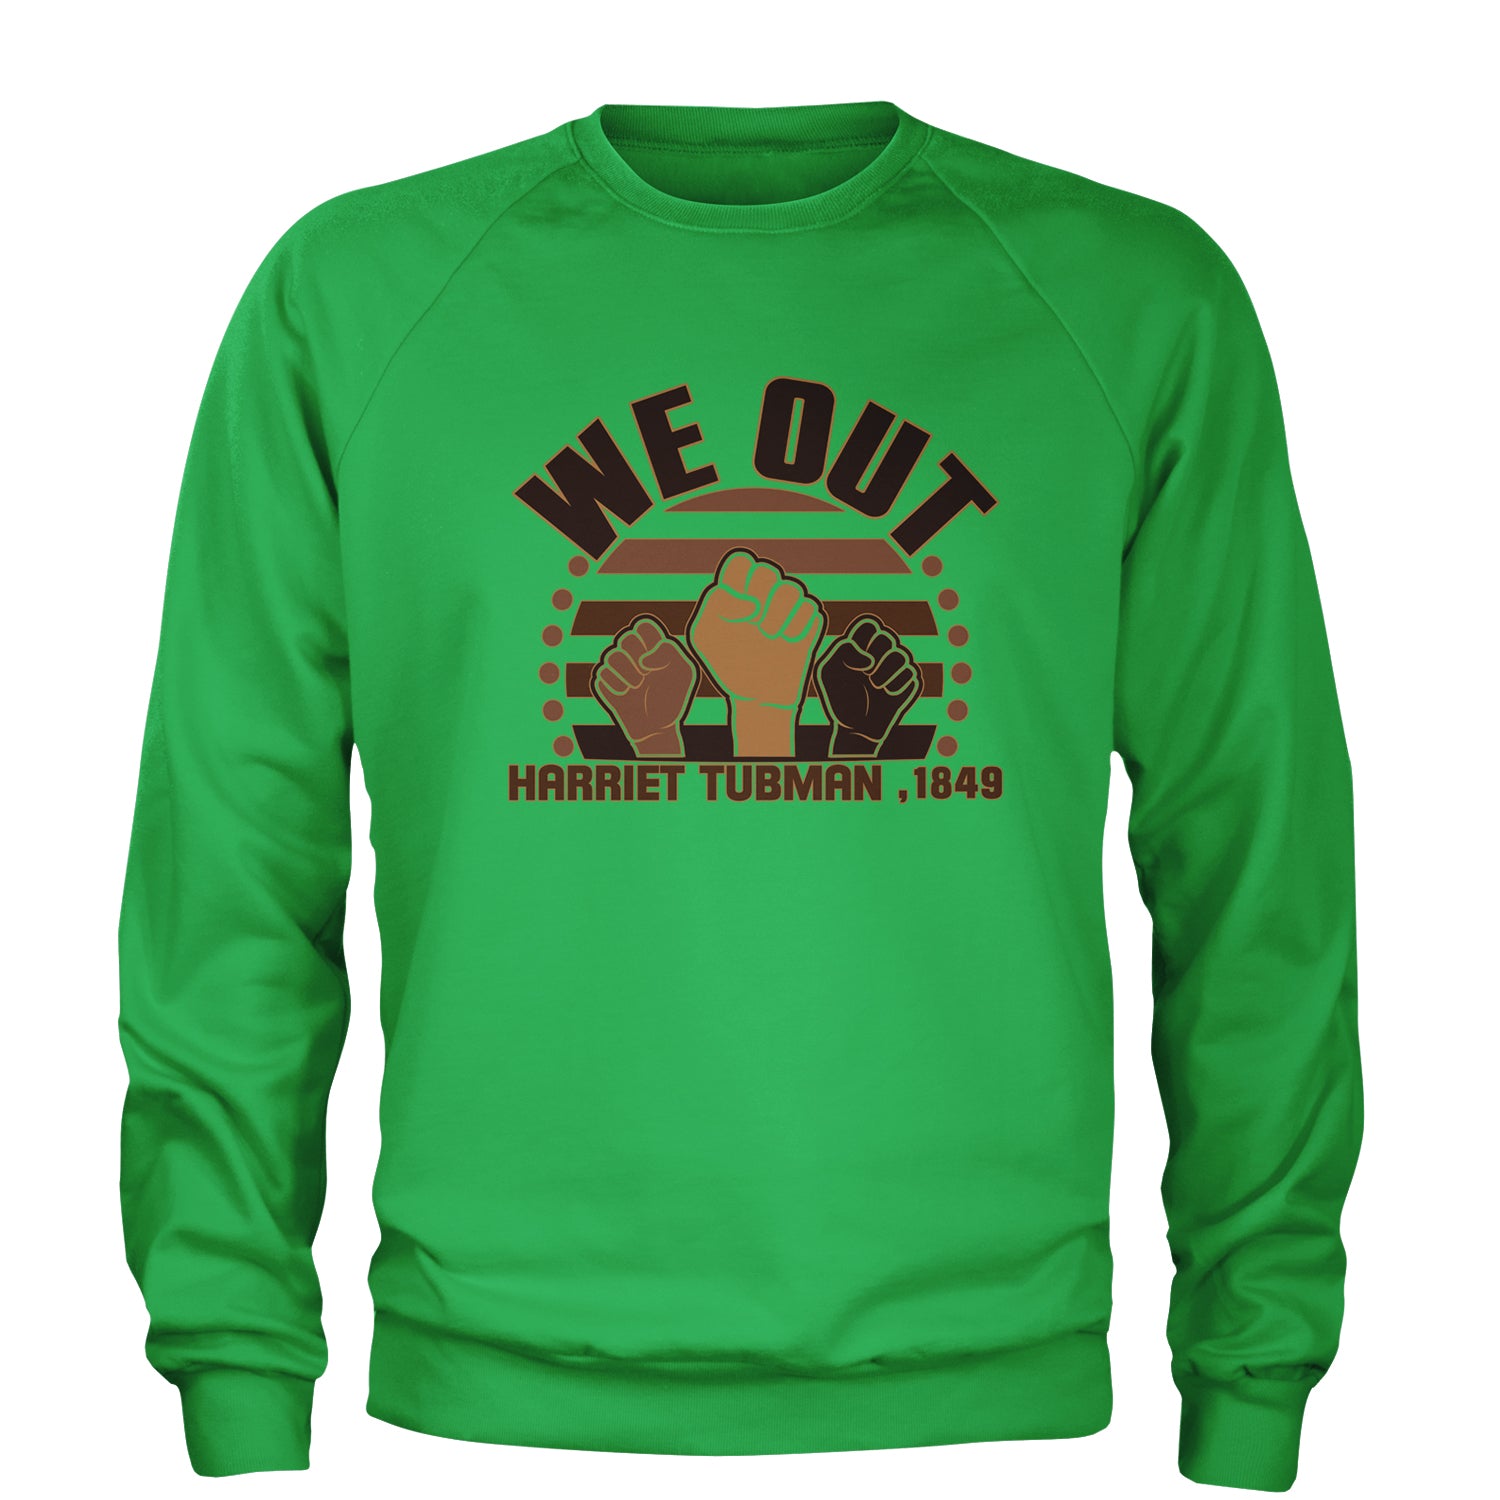 We Out Harriet Tubman Raised Fists BLM Adult Crewneck Sweatshirt african, american, black, blm, harriet, harriett, lives, matter, out, shirt, tubman, we by Expression Tees